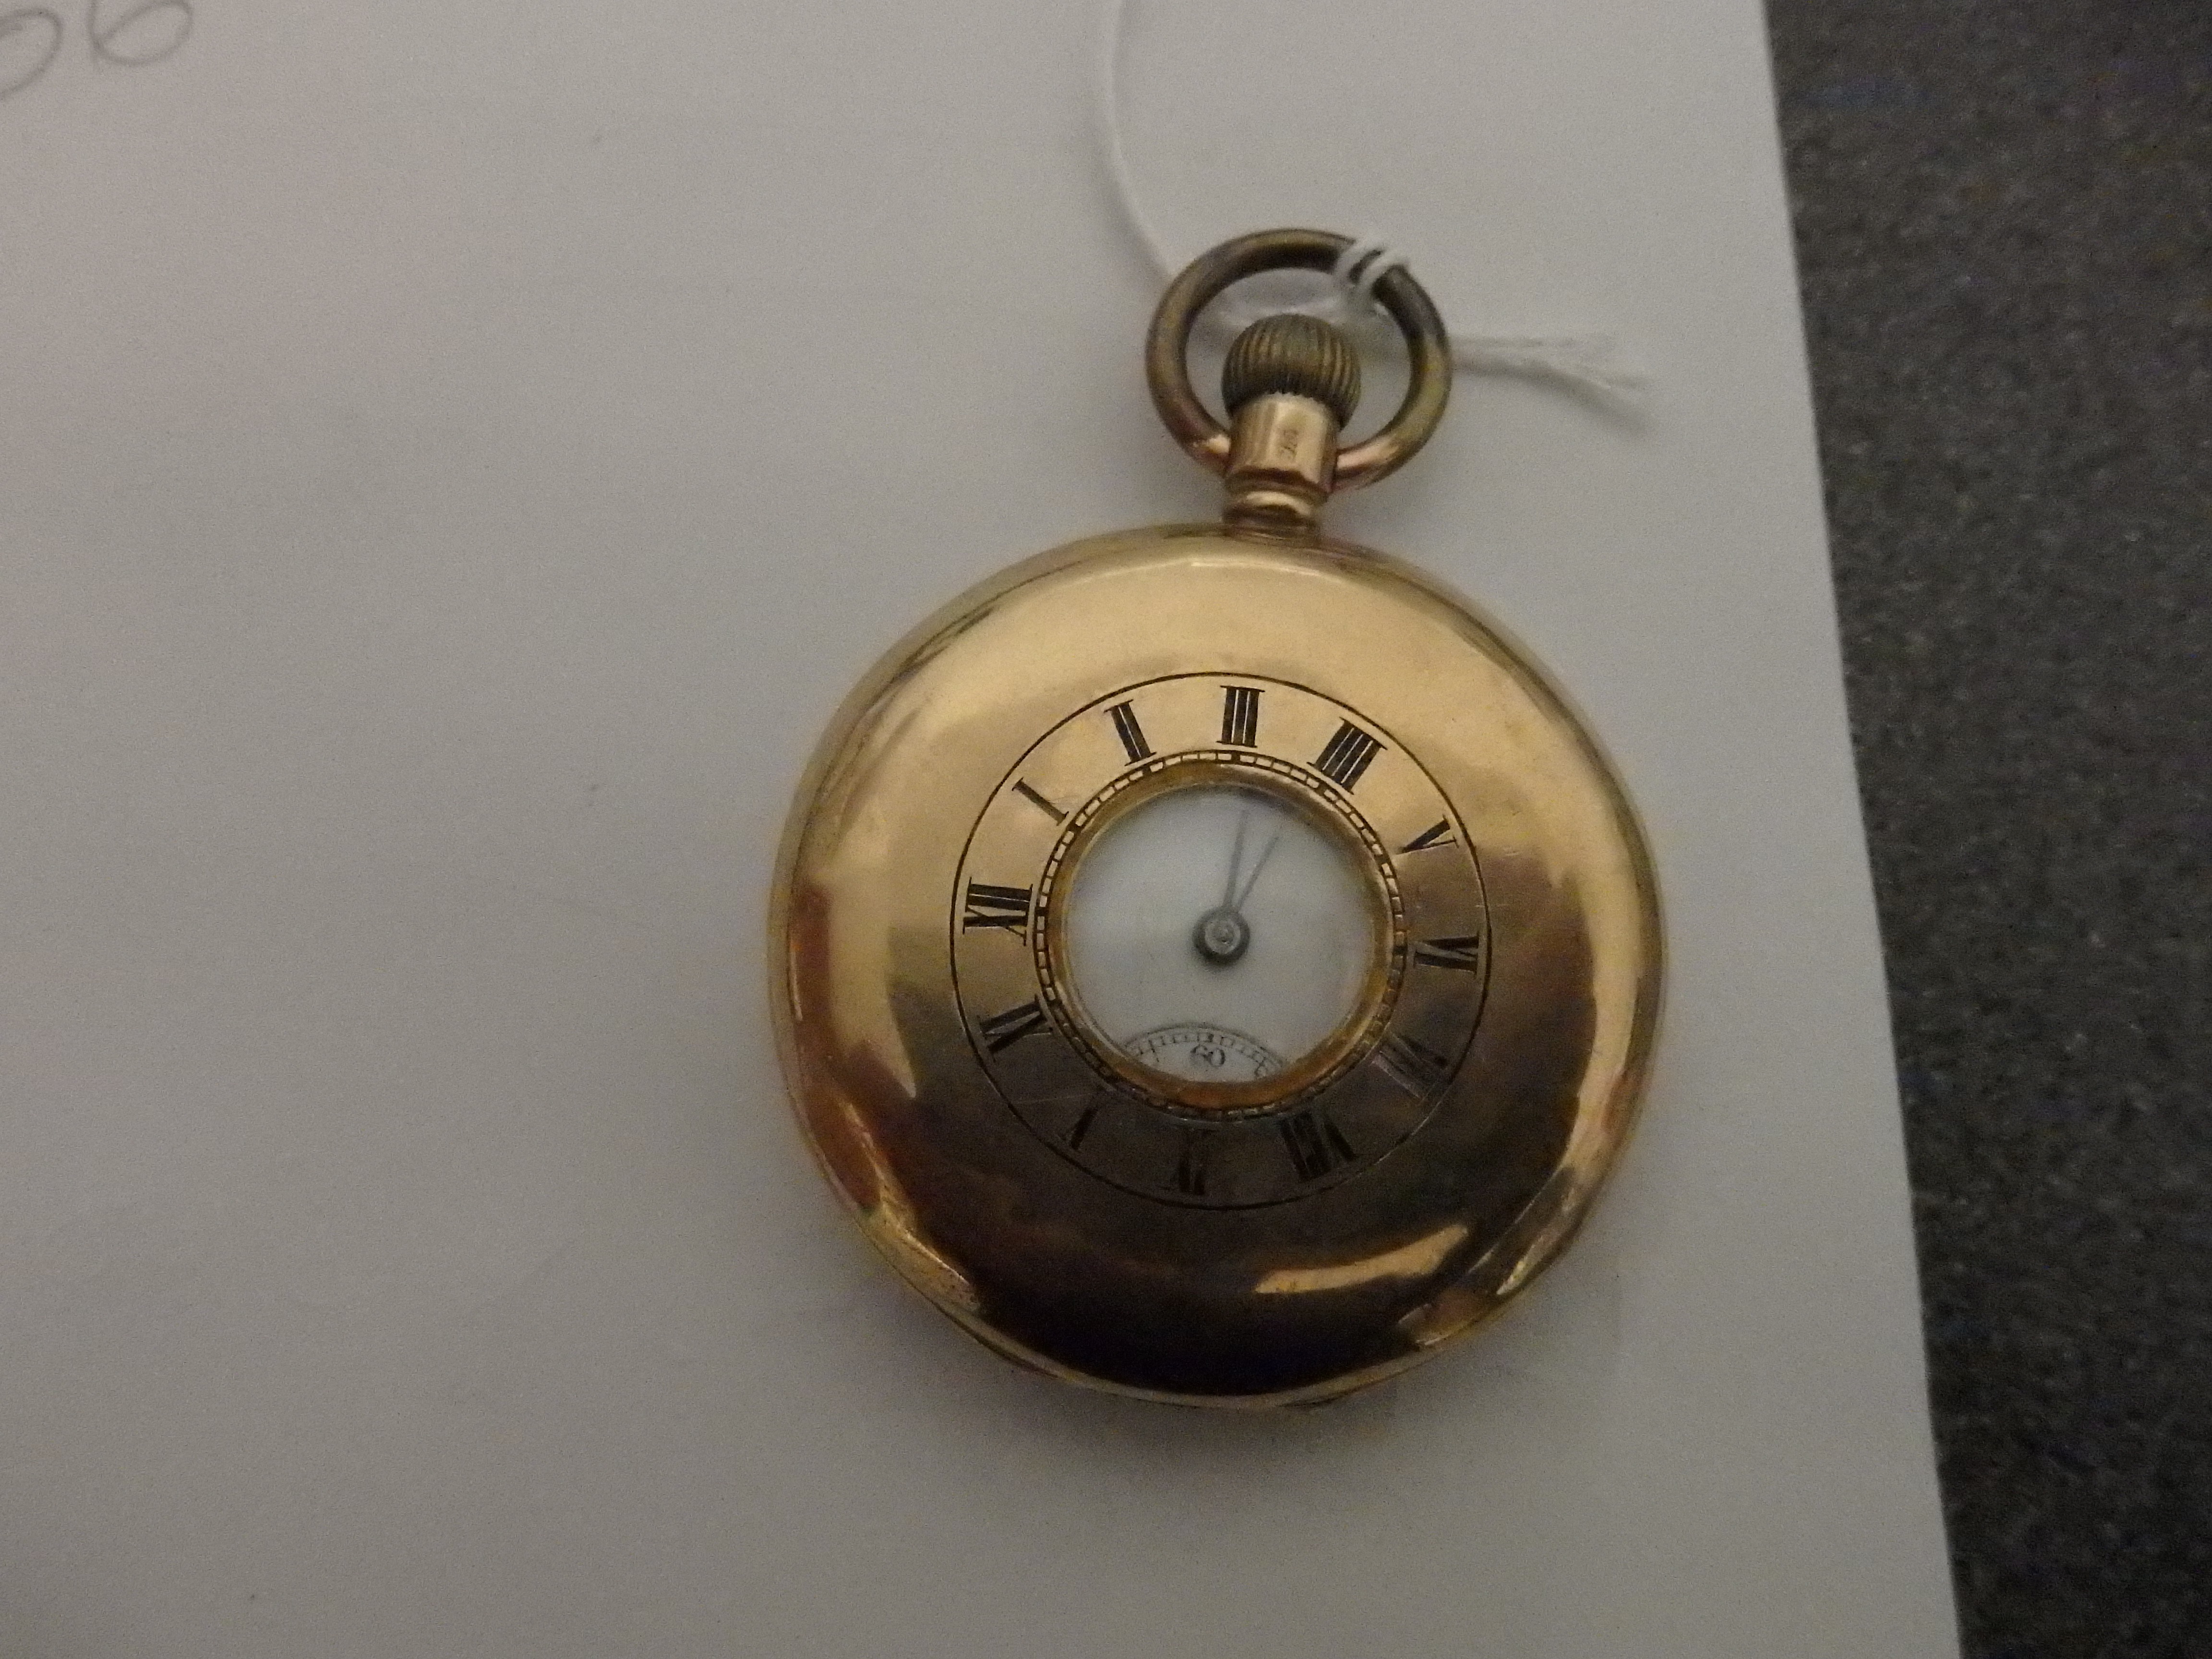 9ct Gold pocket watch made by Waltham - Image 2 of 7